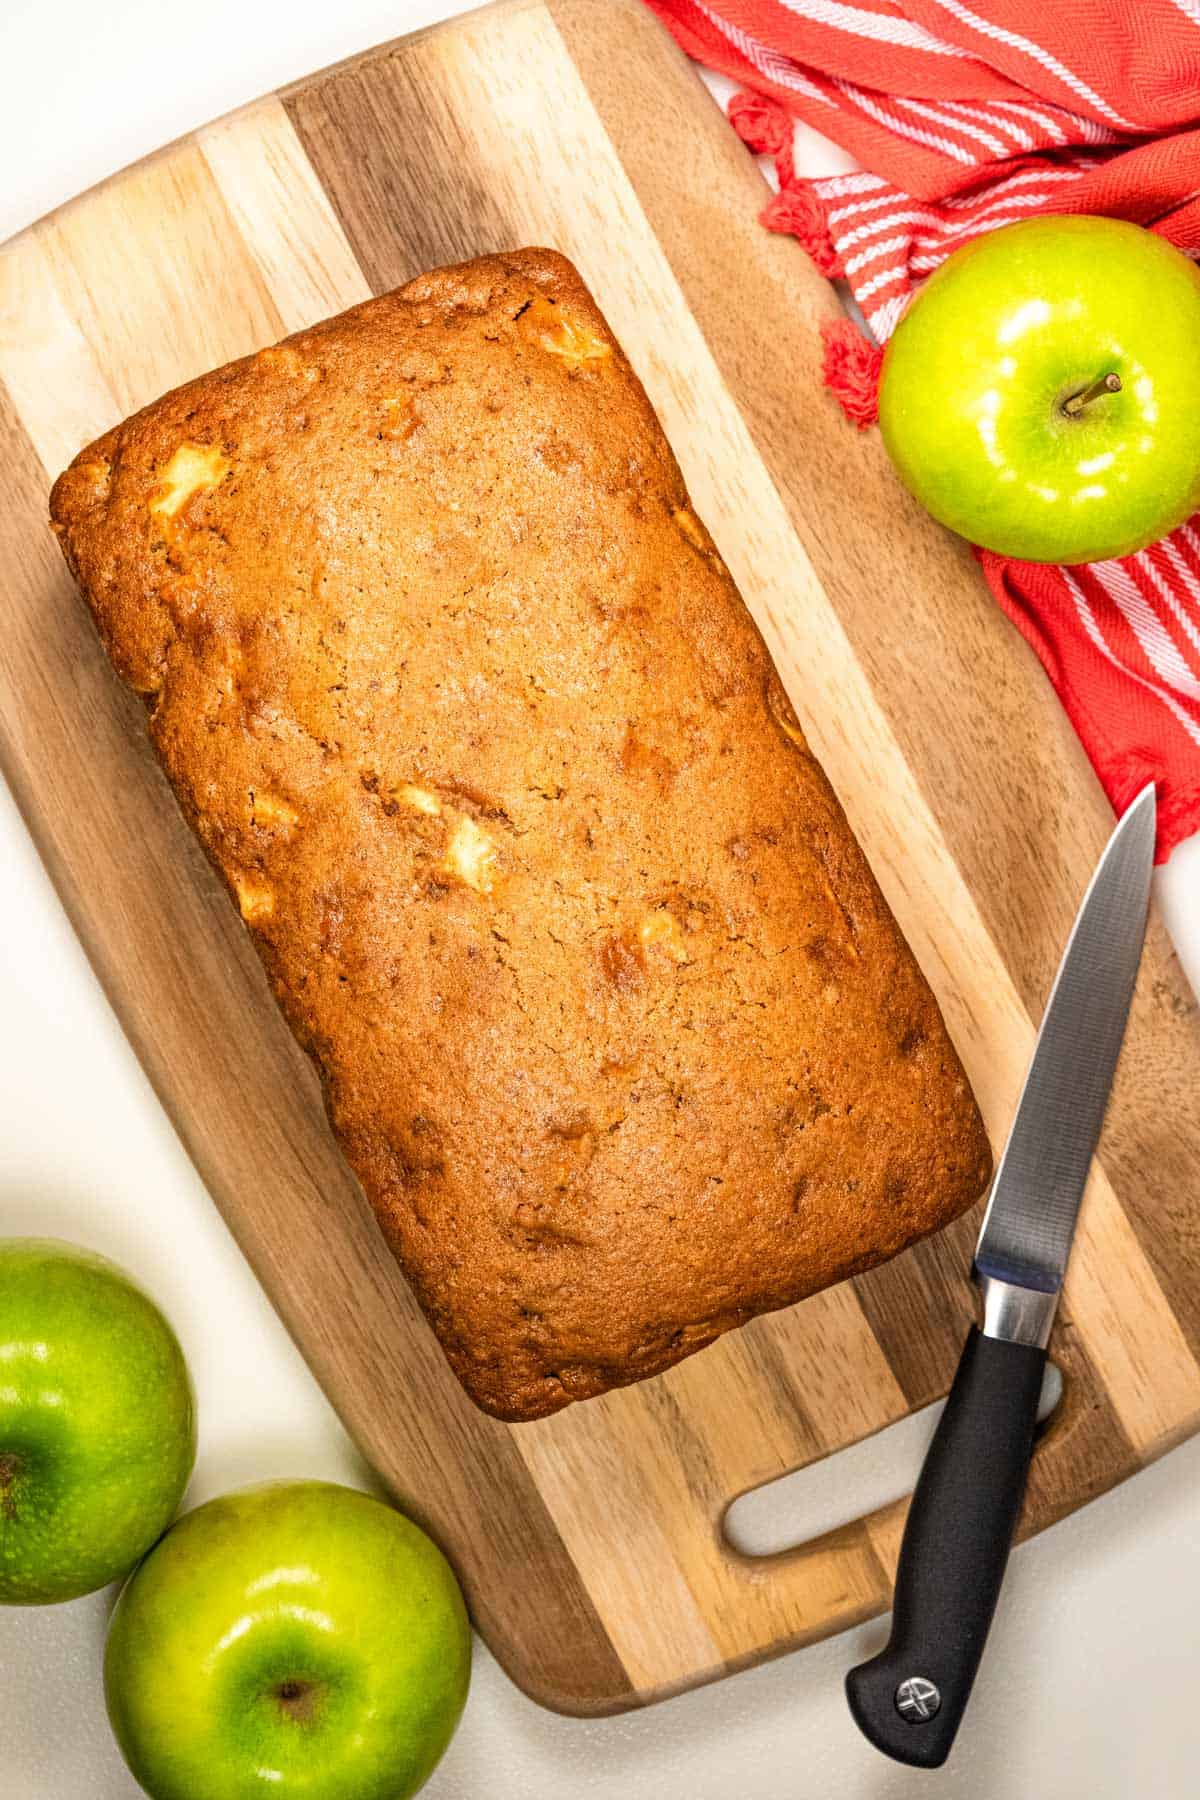 Freshly baked loaf of apple cinnamon bread sitting on a cutting board. Laying around the cutting board are green apples, a knife, and a red towel.